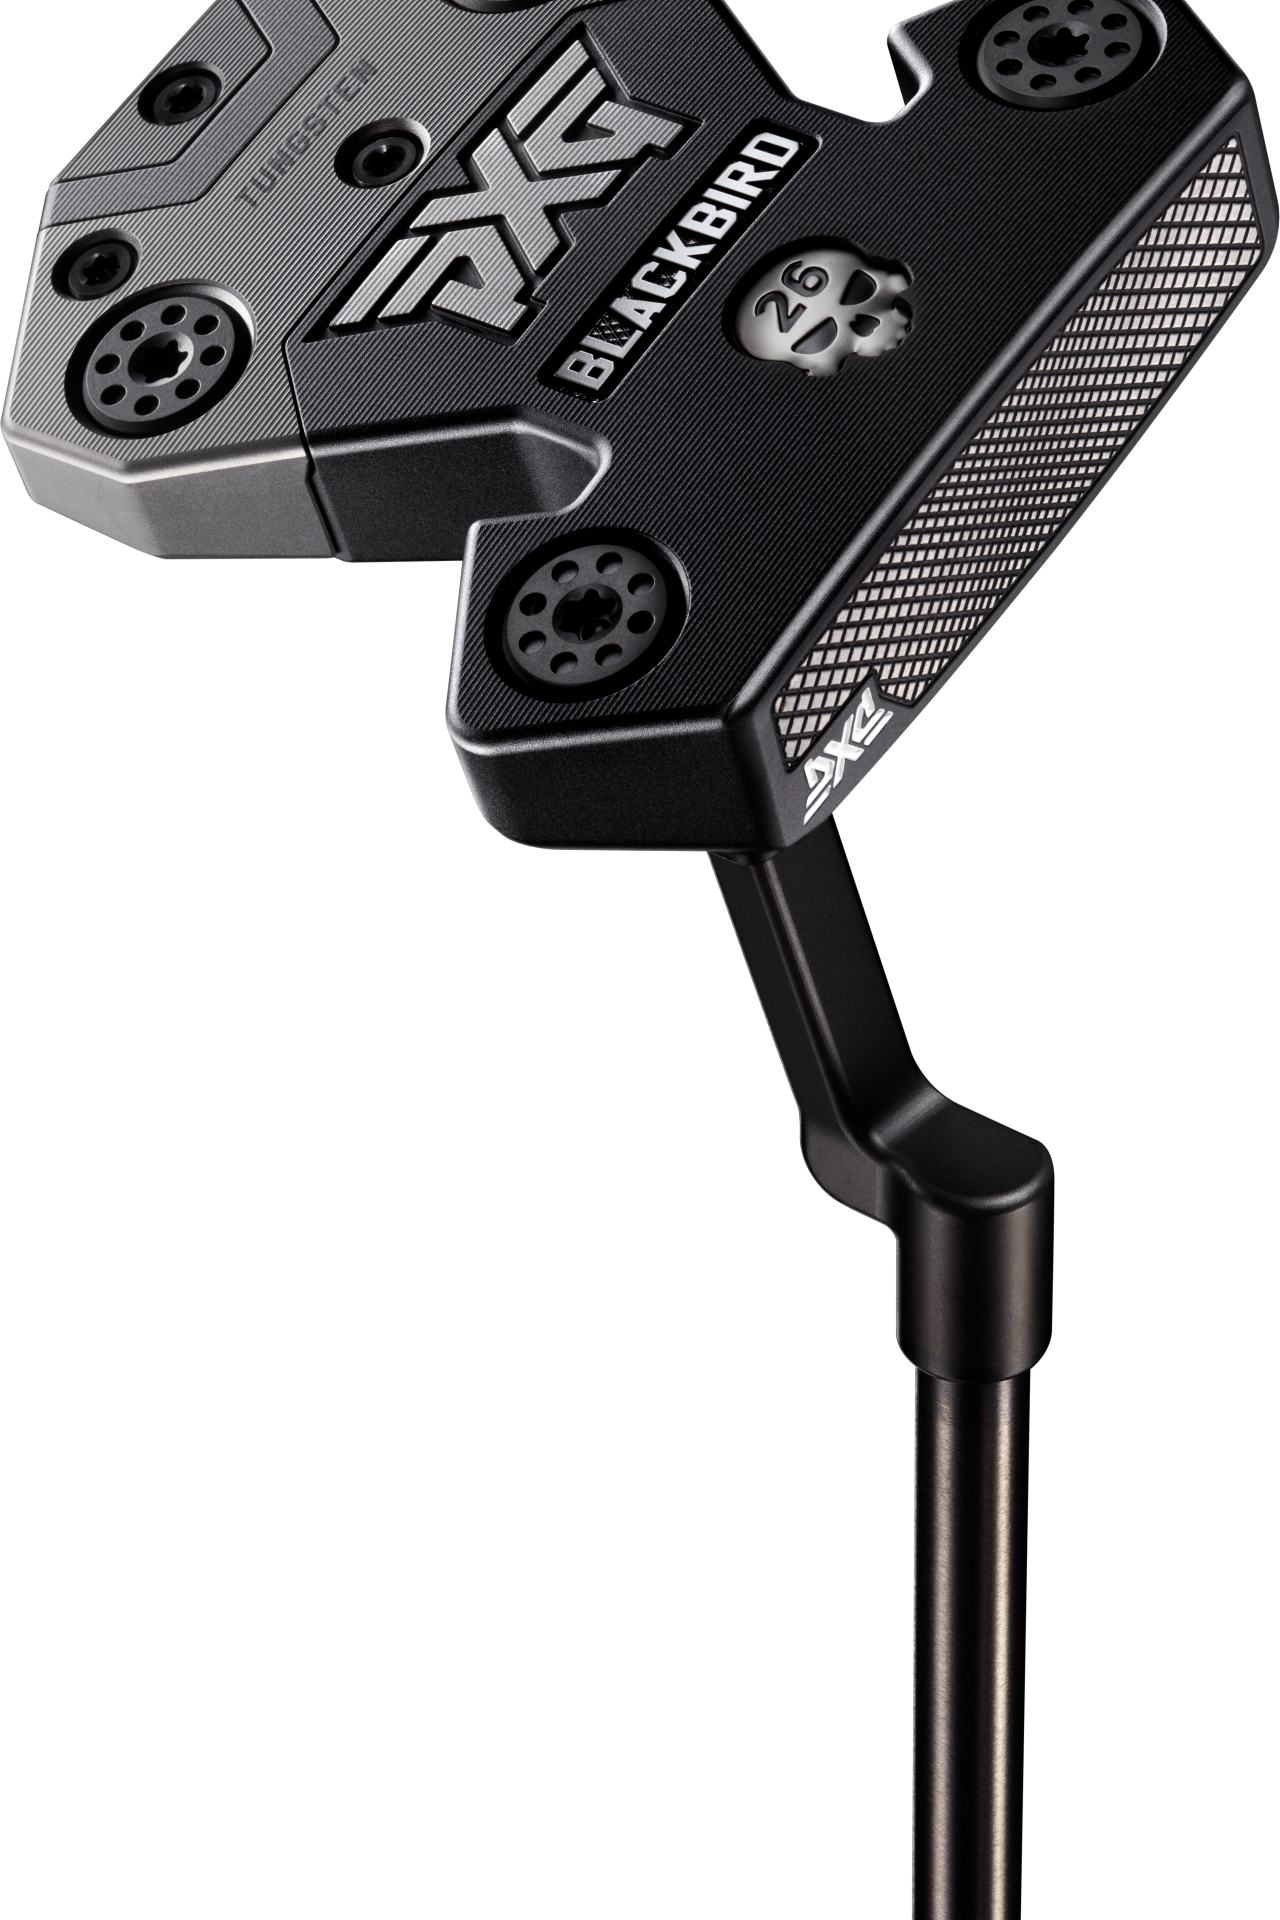 PXG adds two putters to its Battle Ready line. They're affordable ...